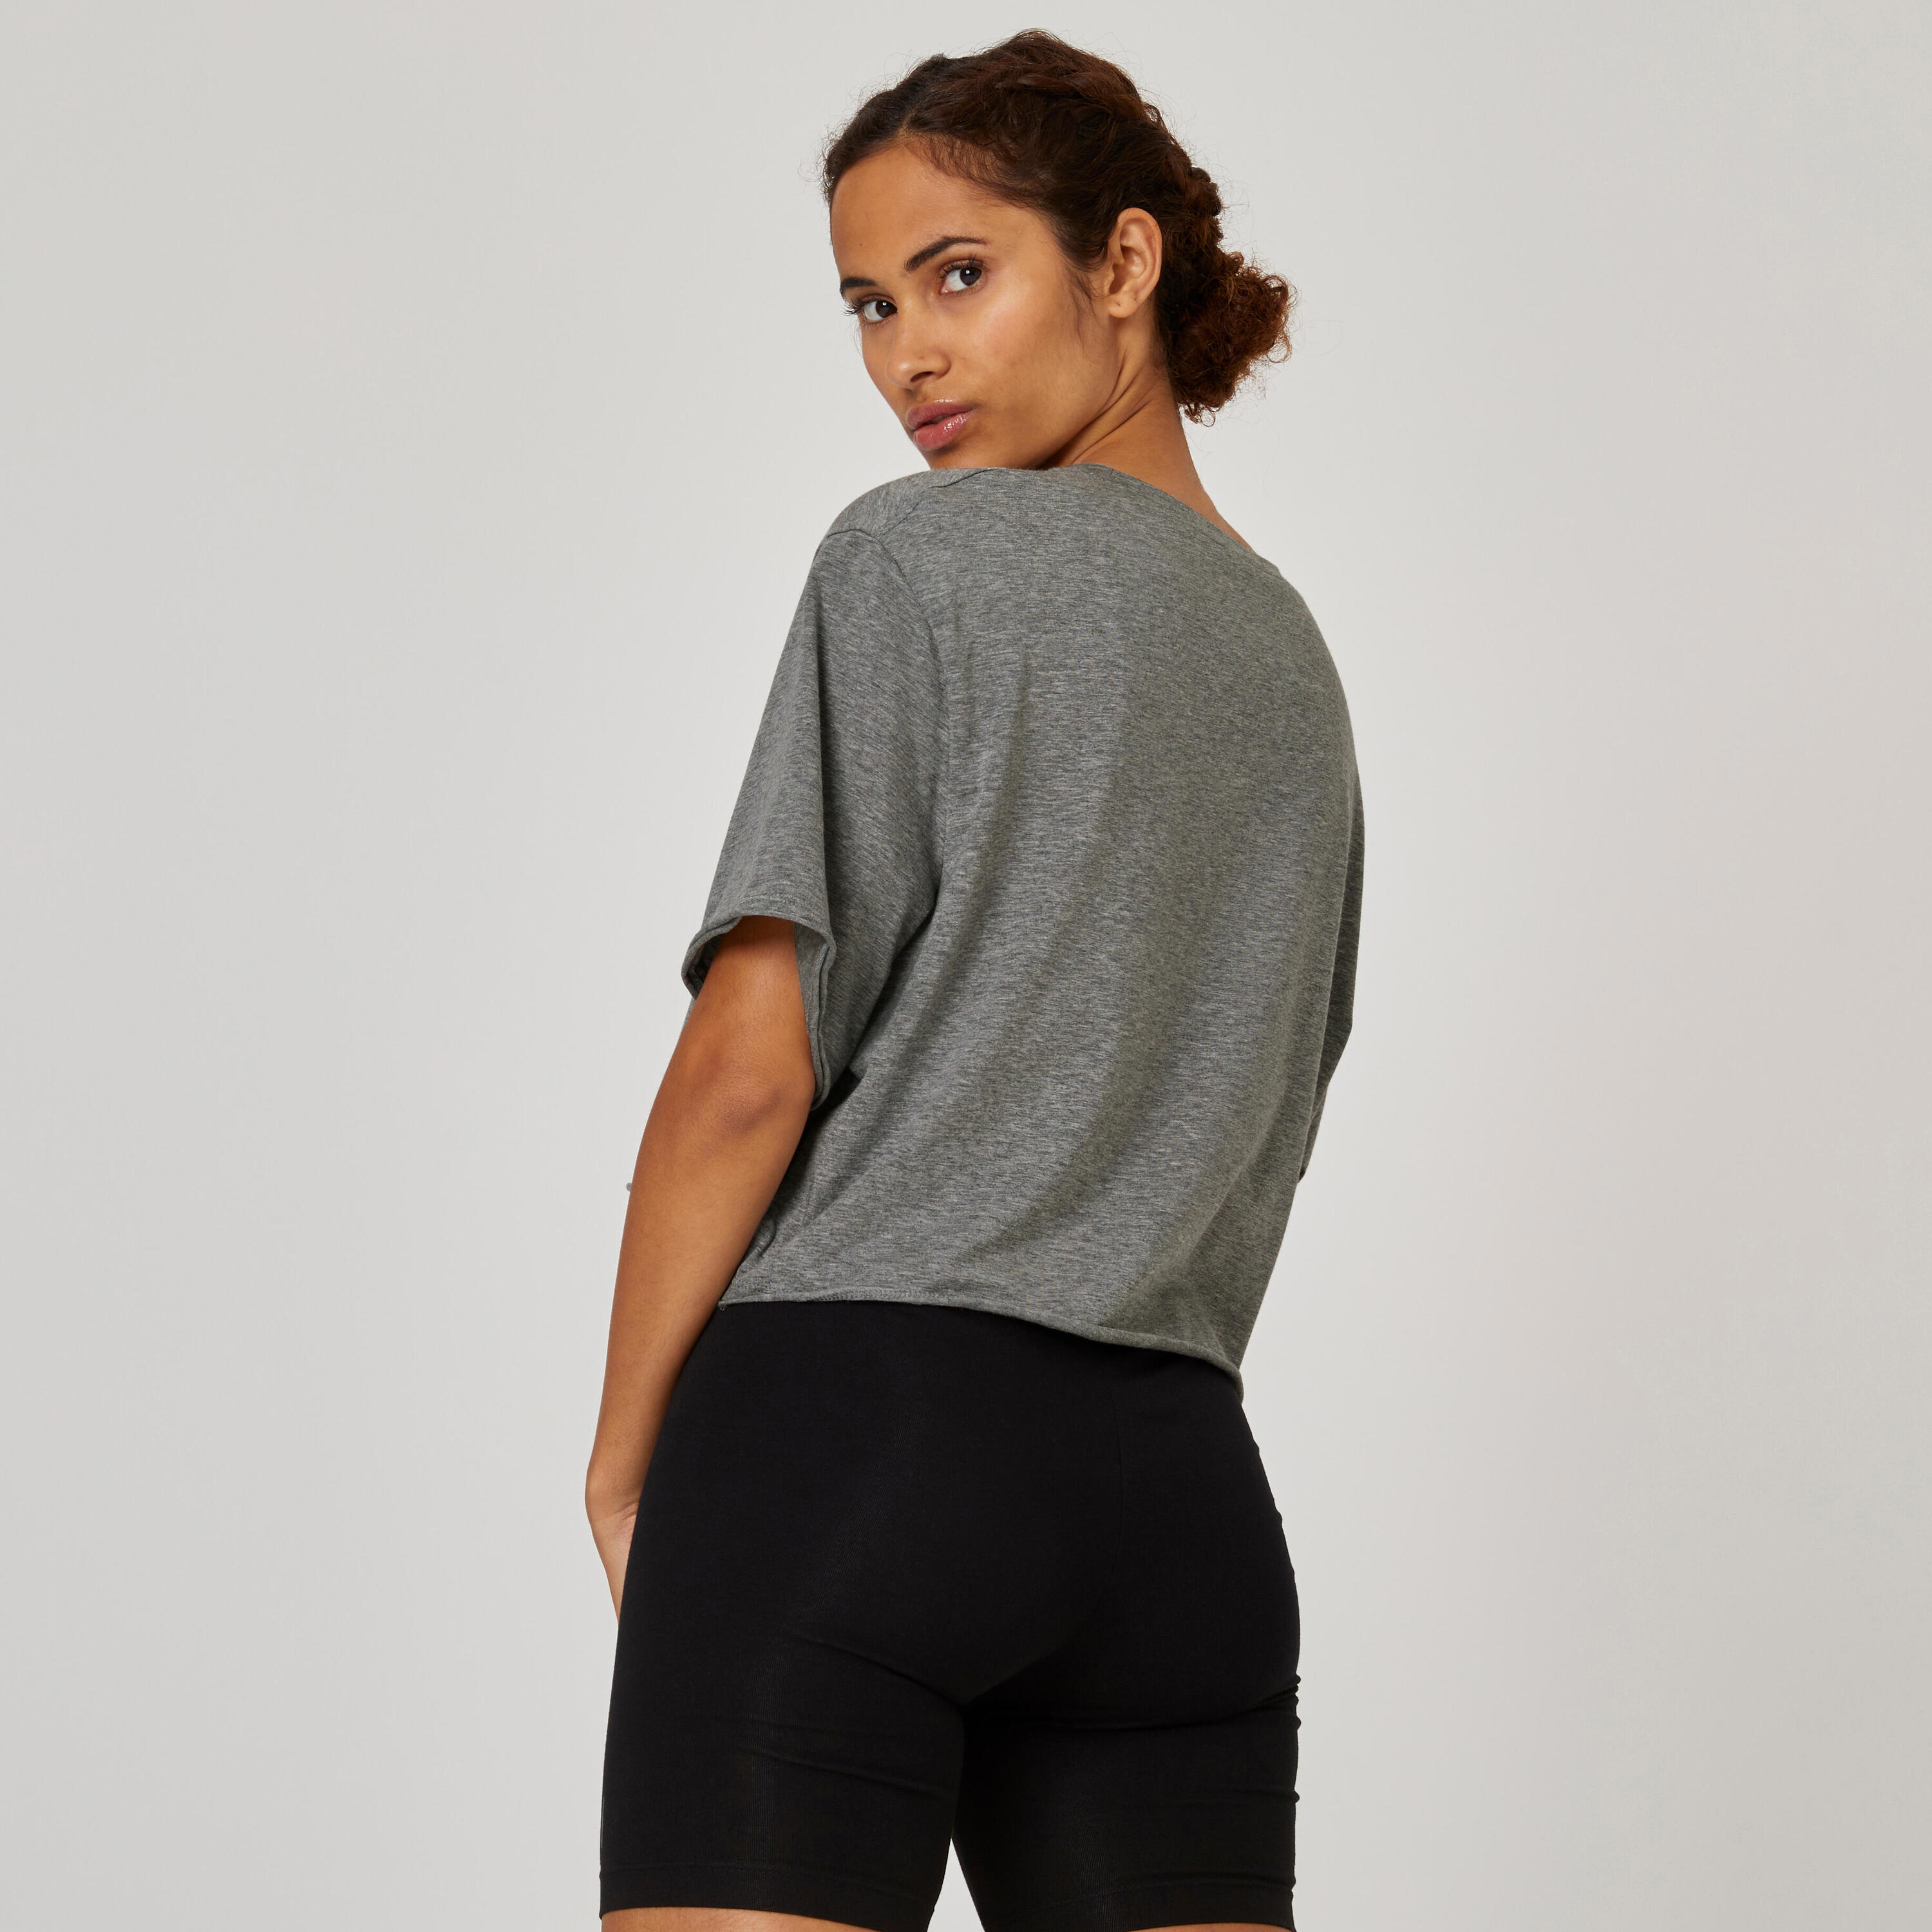 Women's Fitness Cropped T-Shirt 520 - Grey 5/6